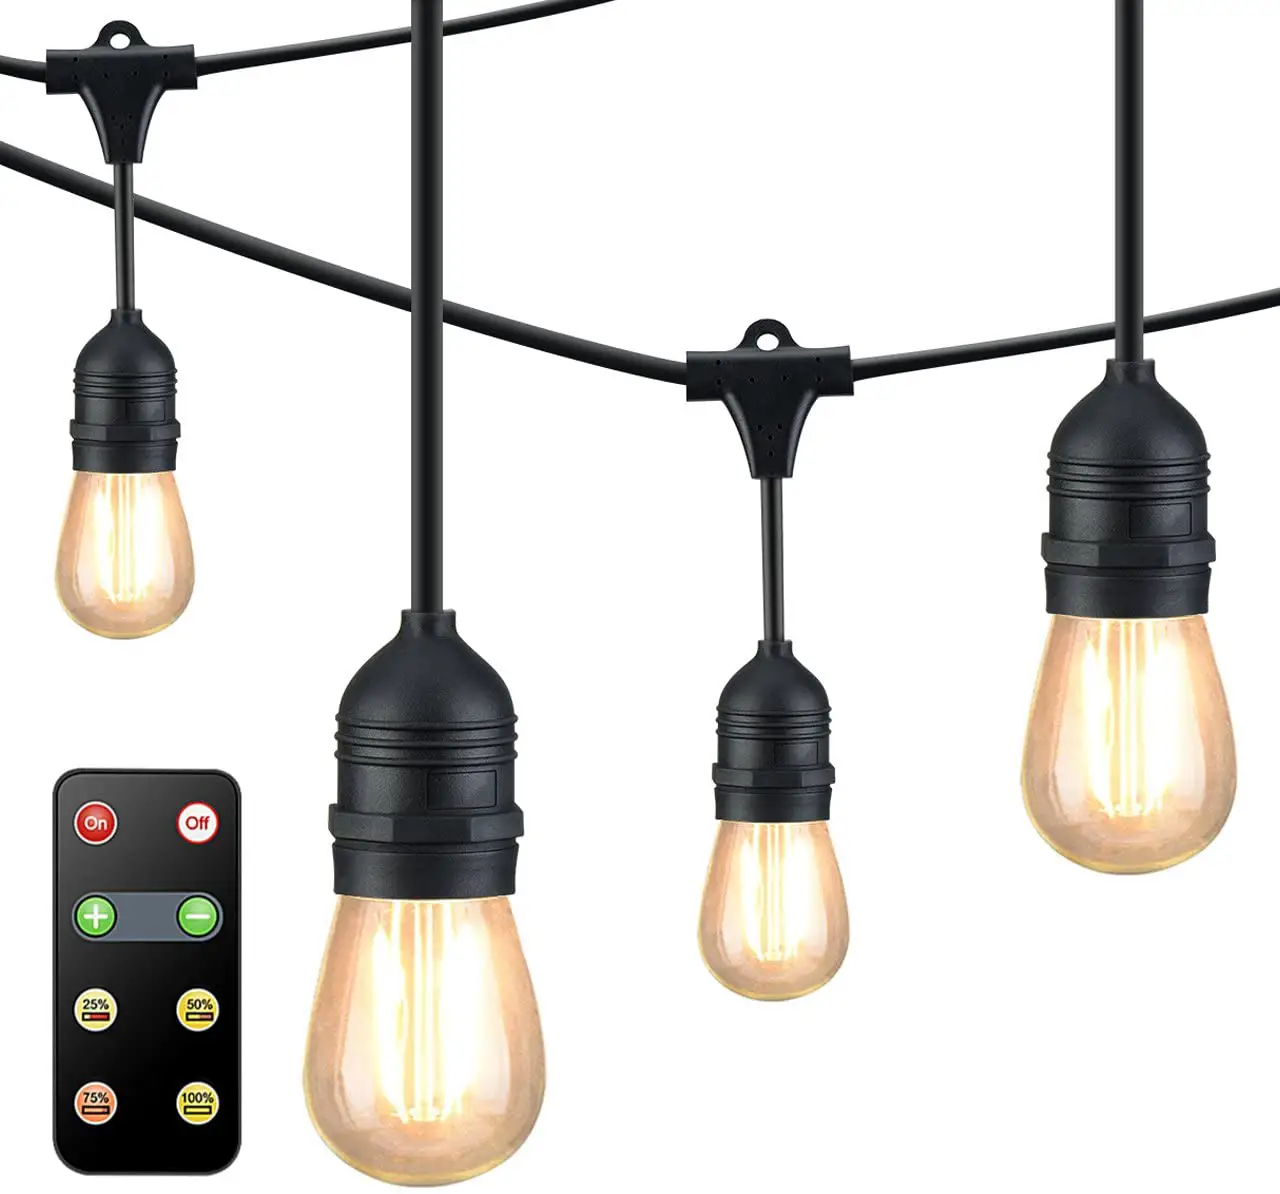 Outdoor Lights With Remote Control, Best Outdoor String Lights With Remote